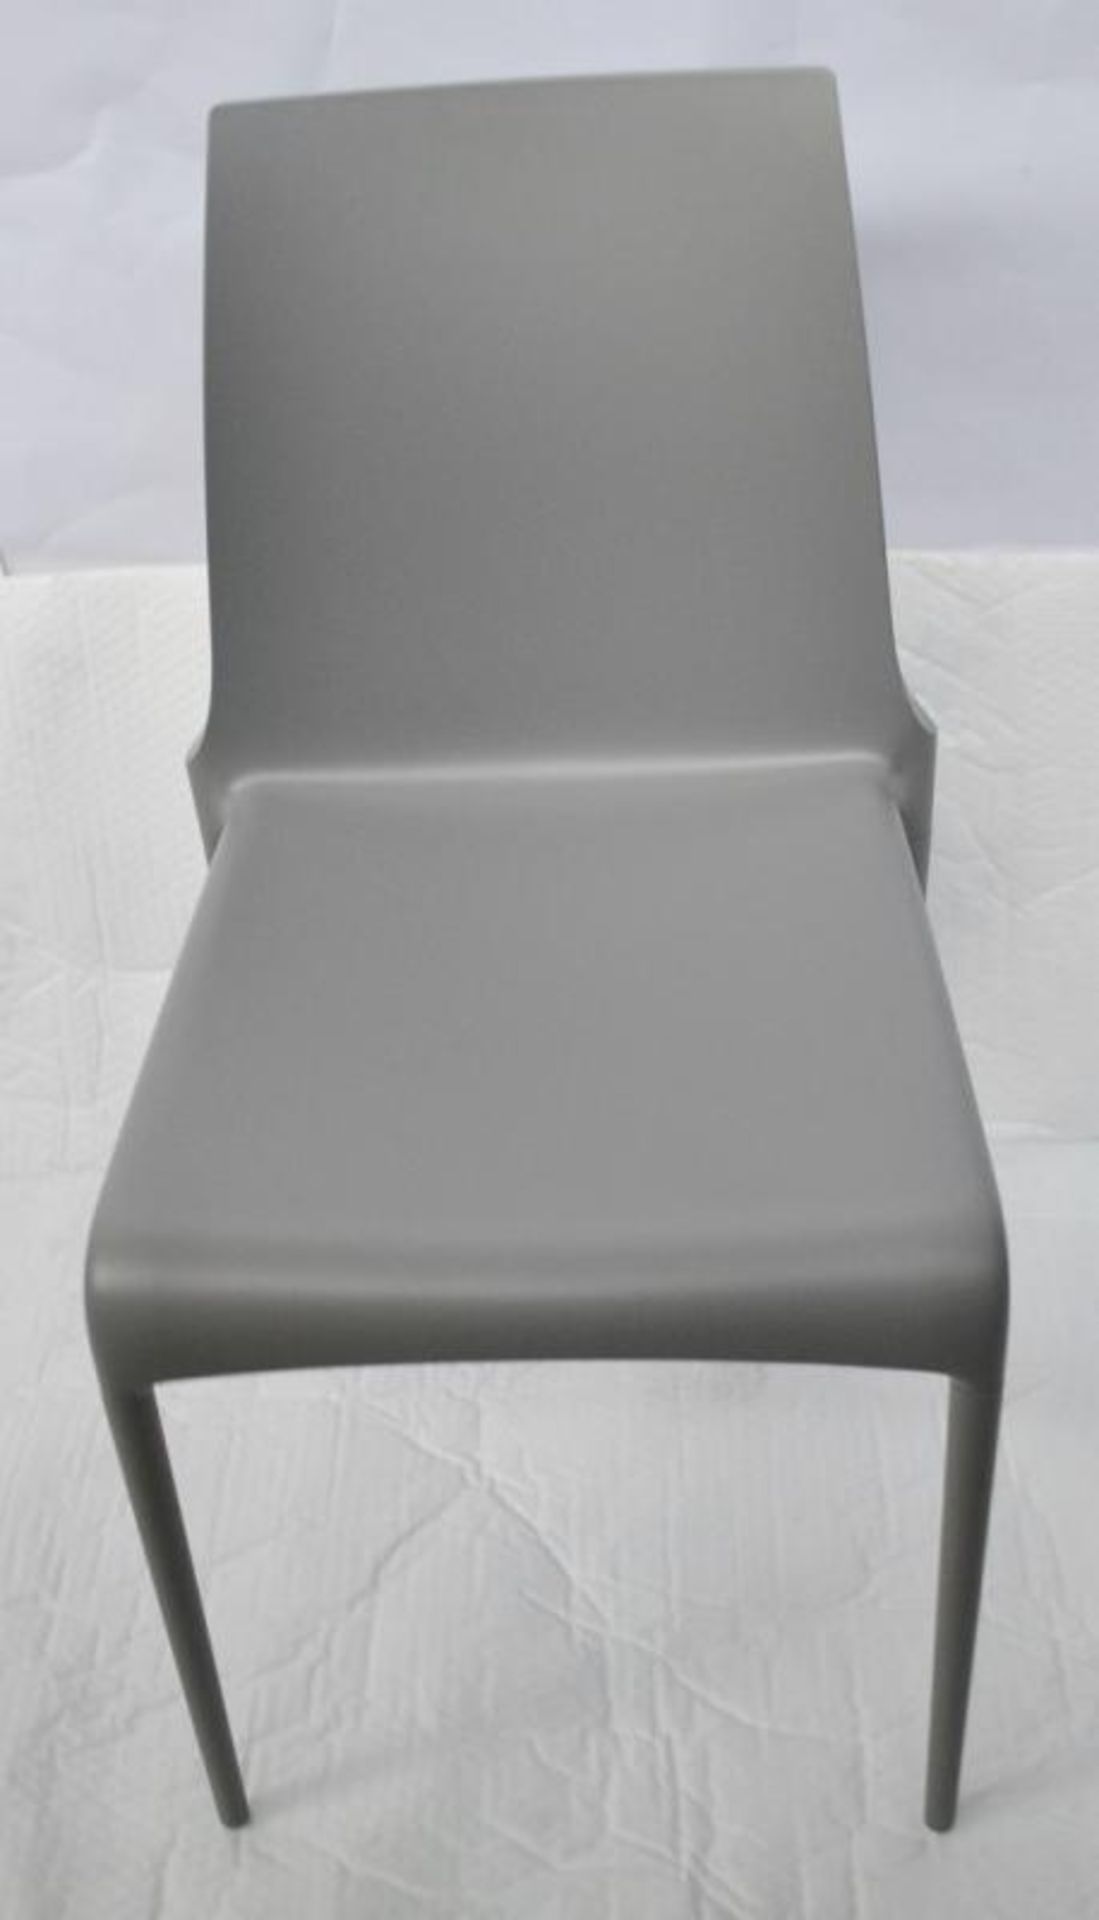 2 x LIGNE ROSET "Petra" Stackable Dining Chairs - Dimensions: W42 x D45 x H83, Seat Height: 46cm - - Image 4 of 7